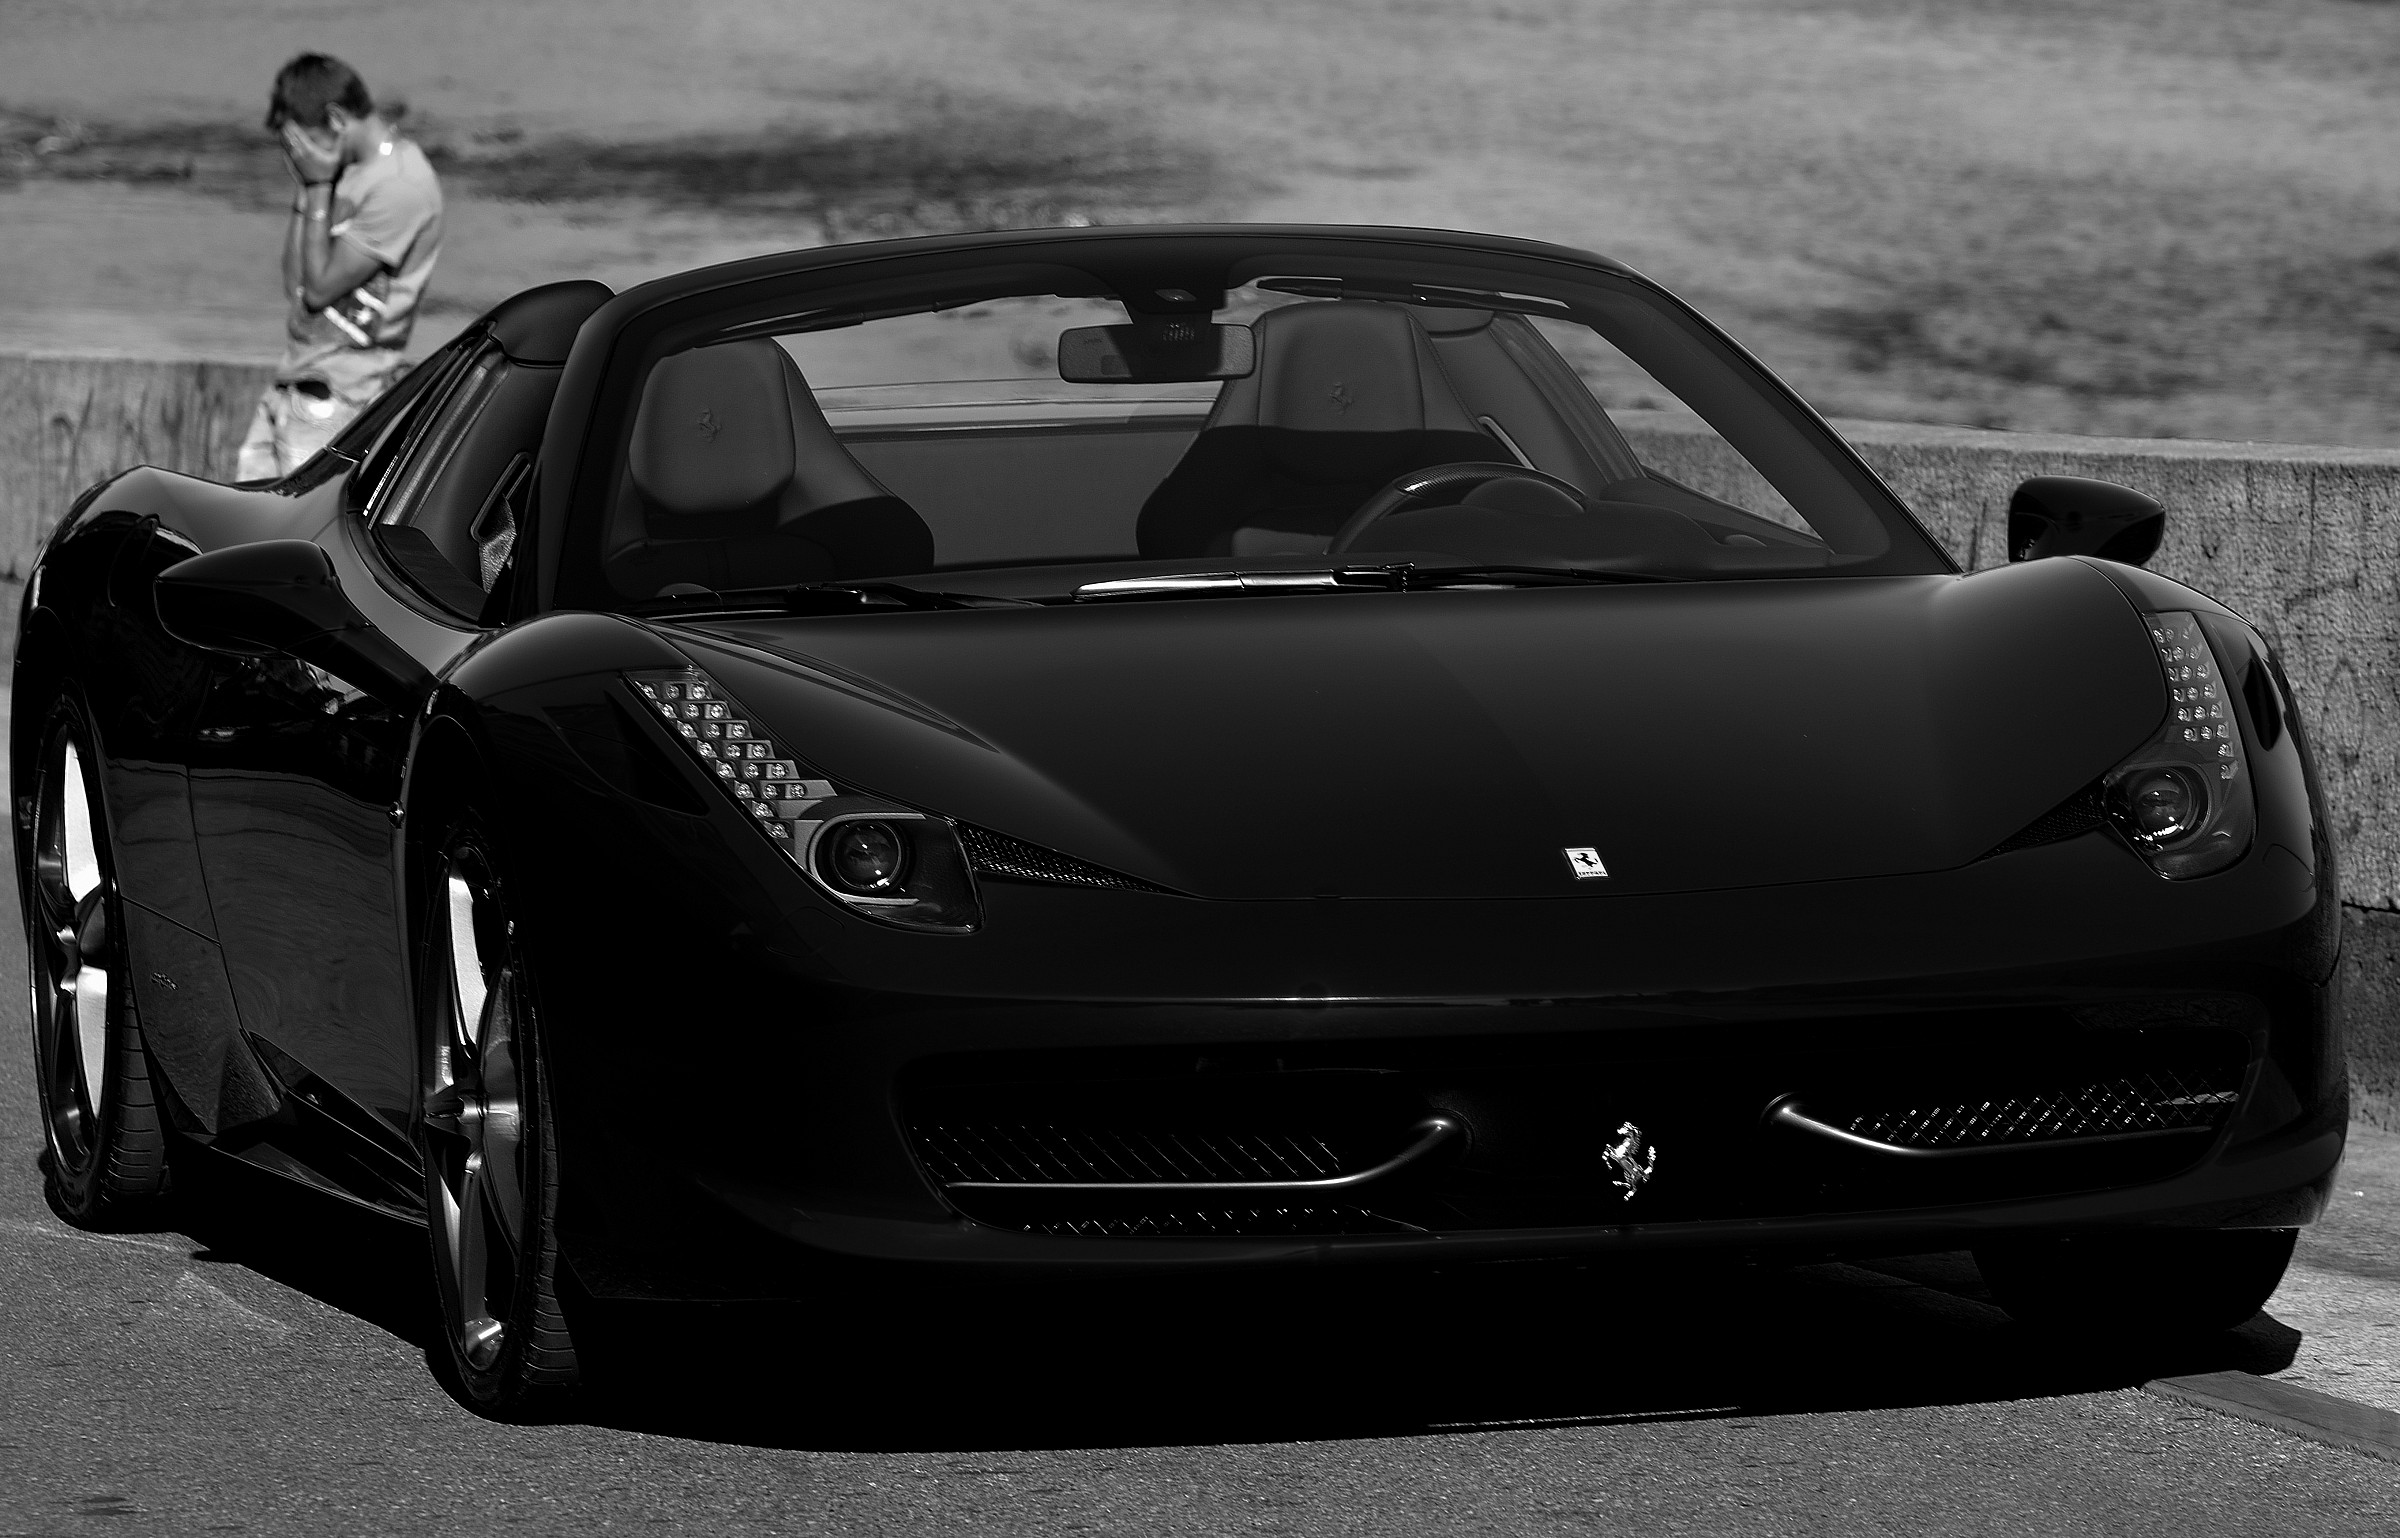 A Ferrari does not give happiness ................